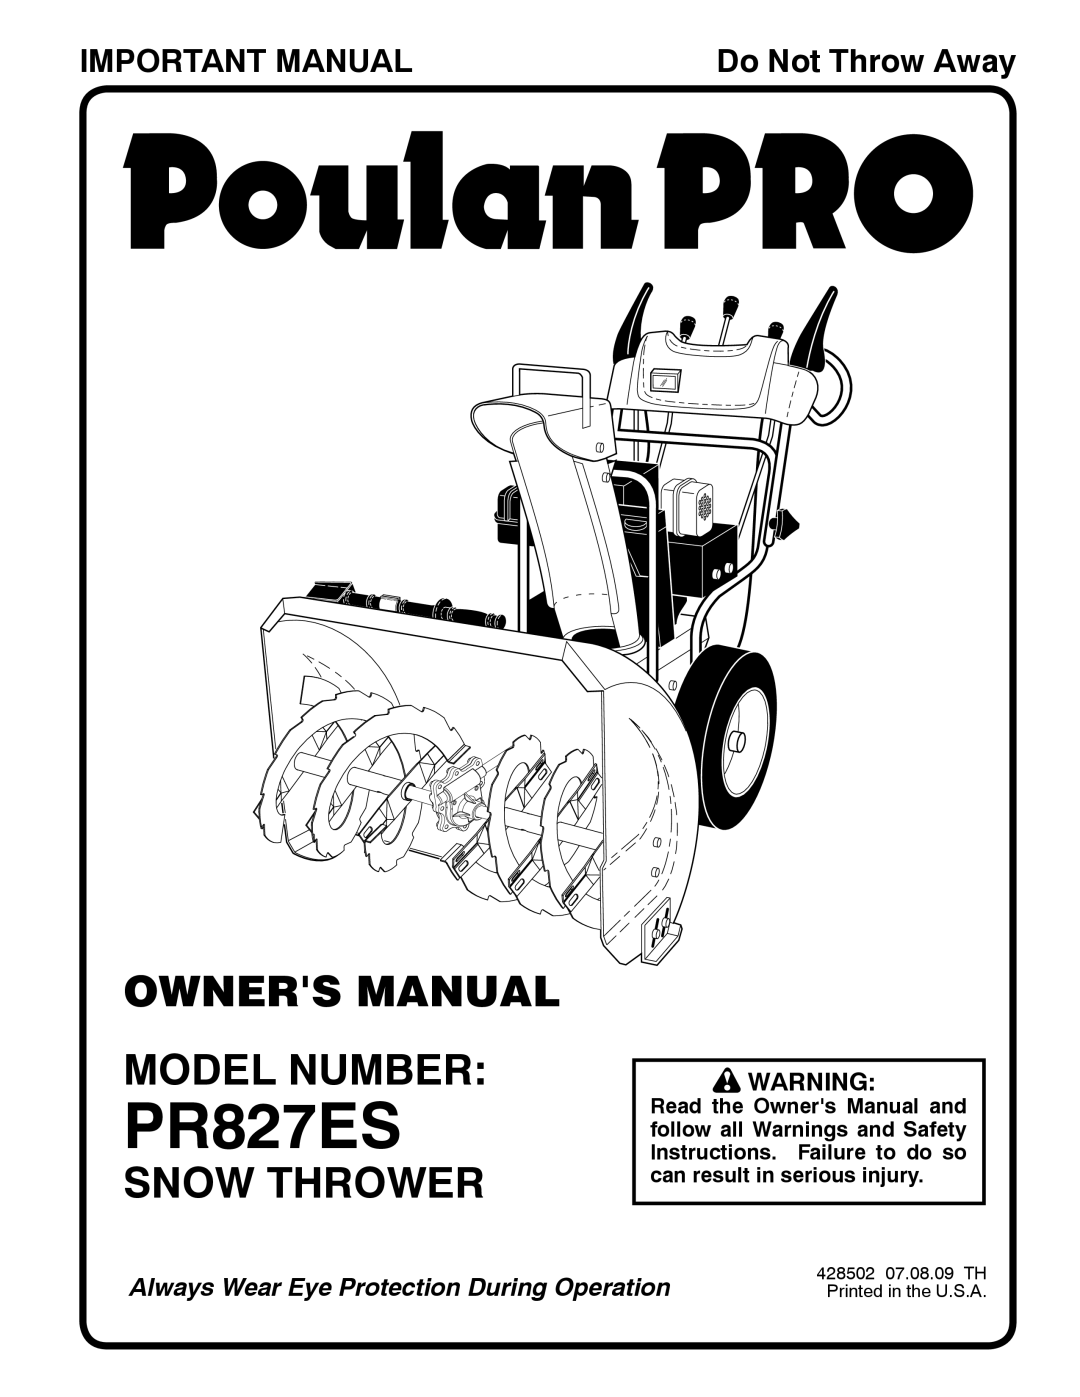 Poulan PR827ES owner manual Owners Manual Model Number, Snow Thrower, Important Manual, Do Not Throw Away 